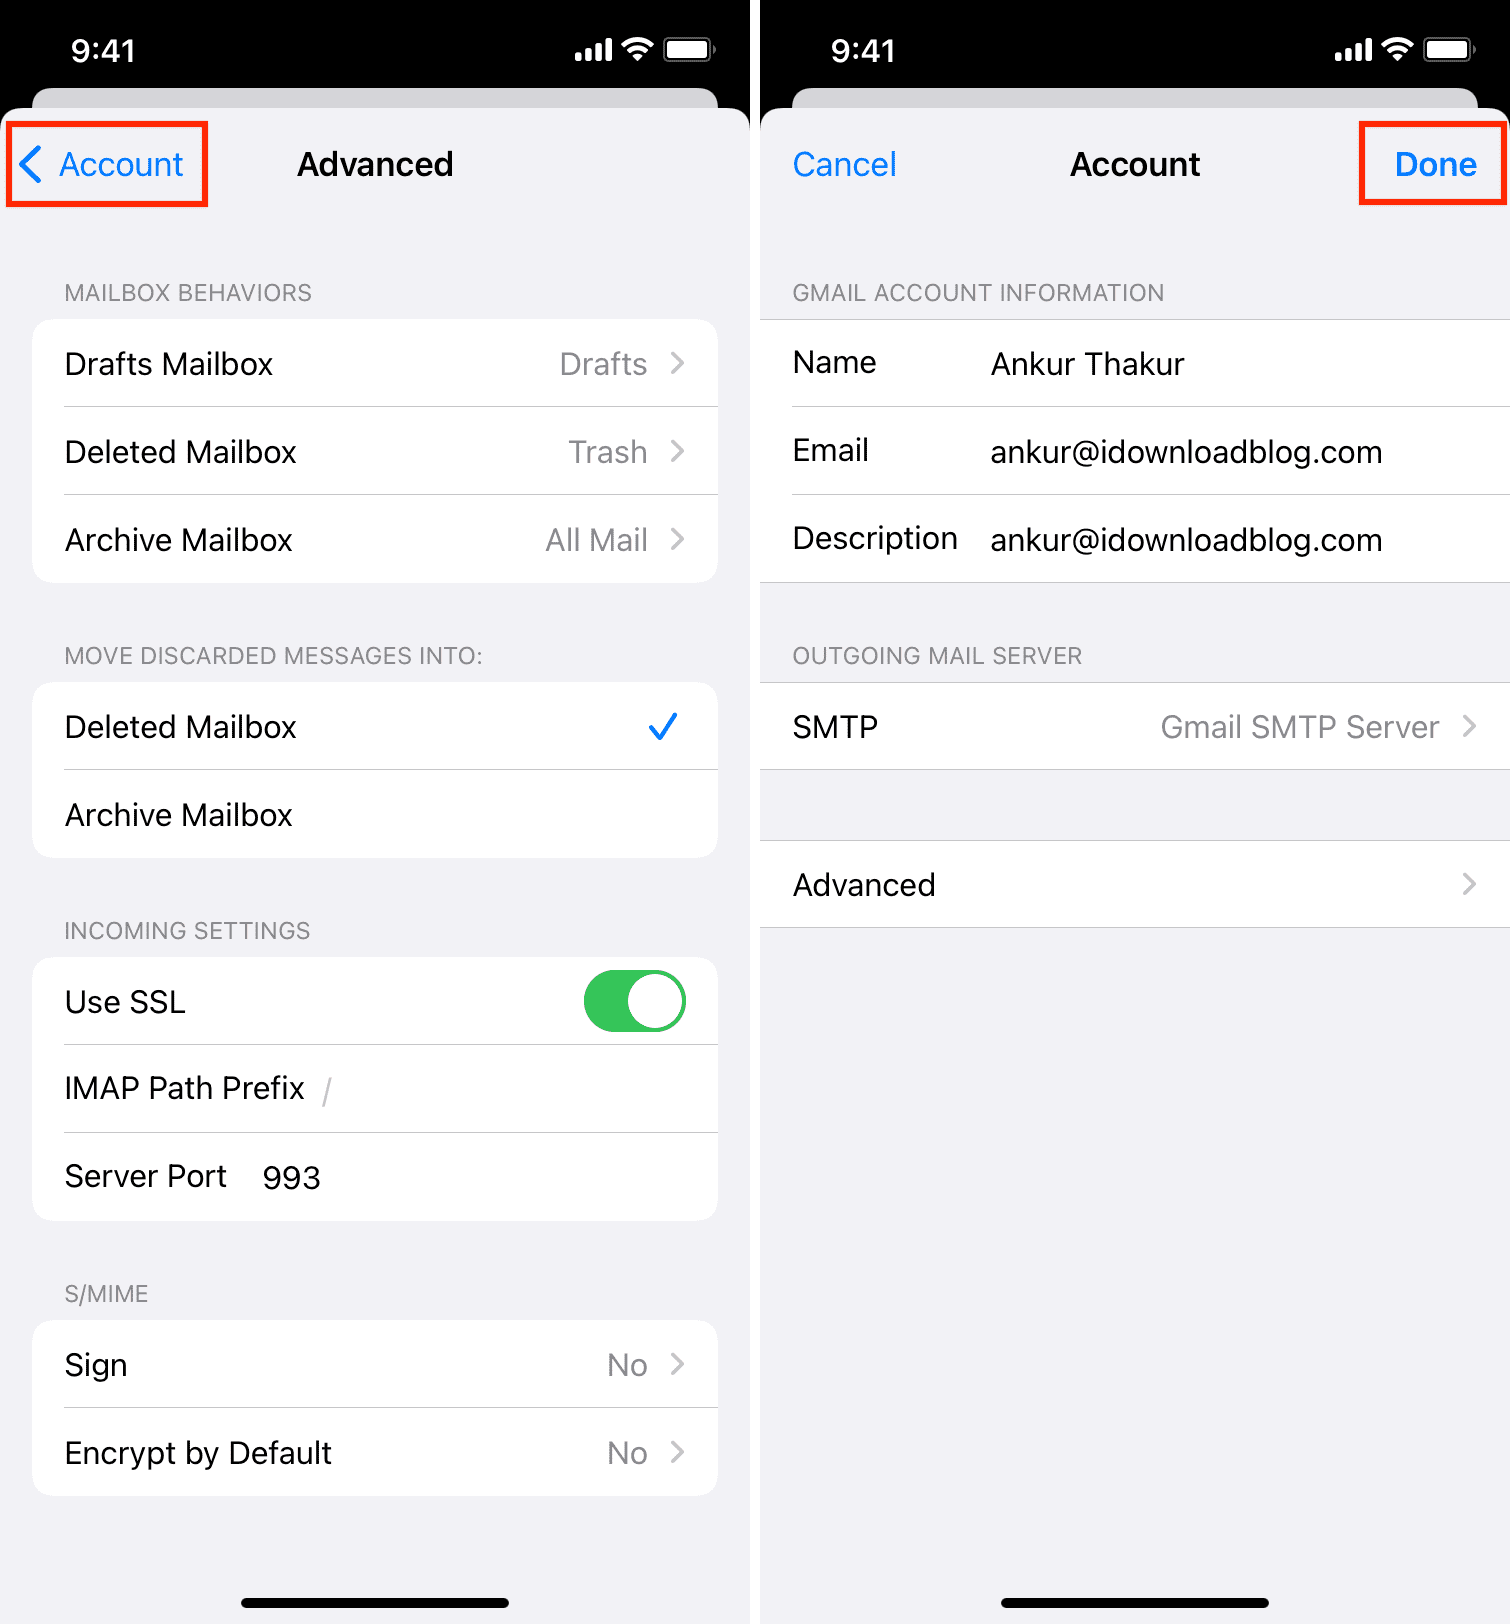 Save Deleted Mailbox settings